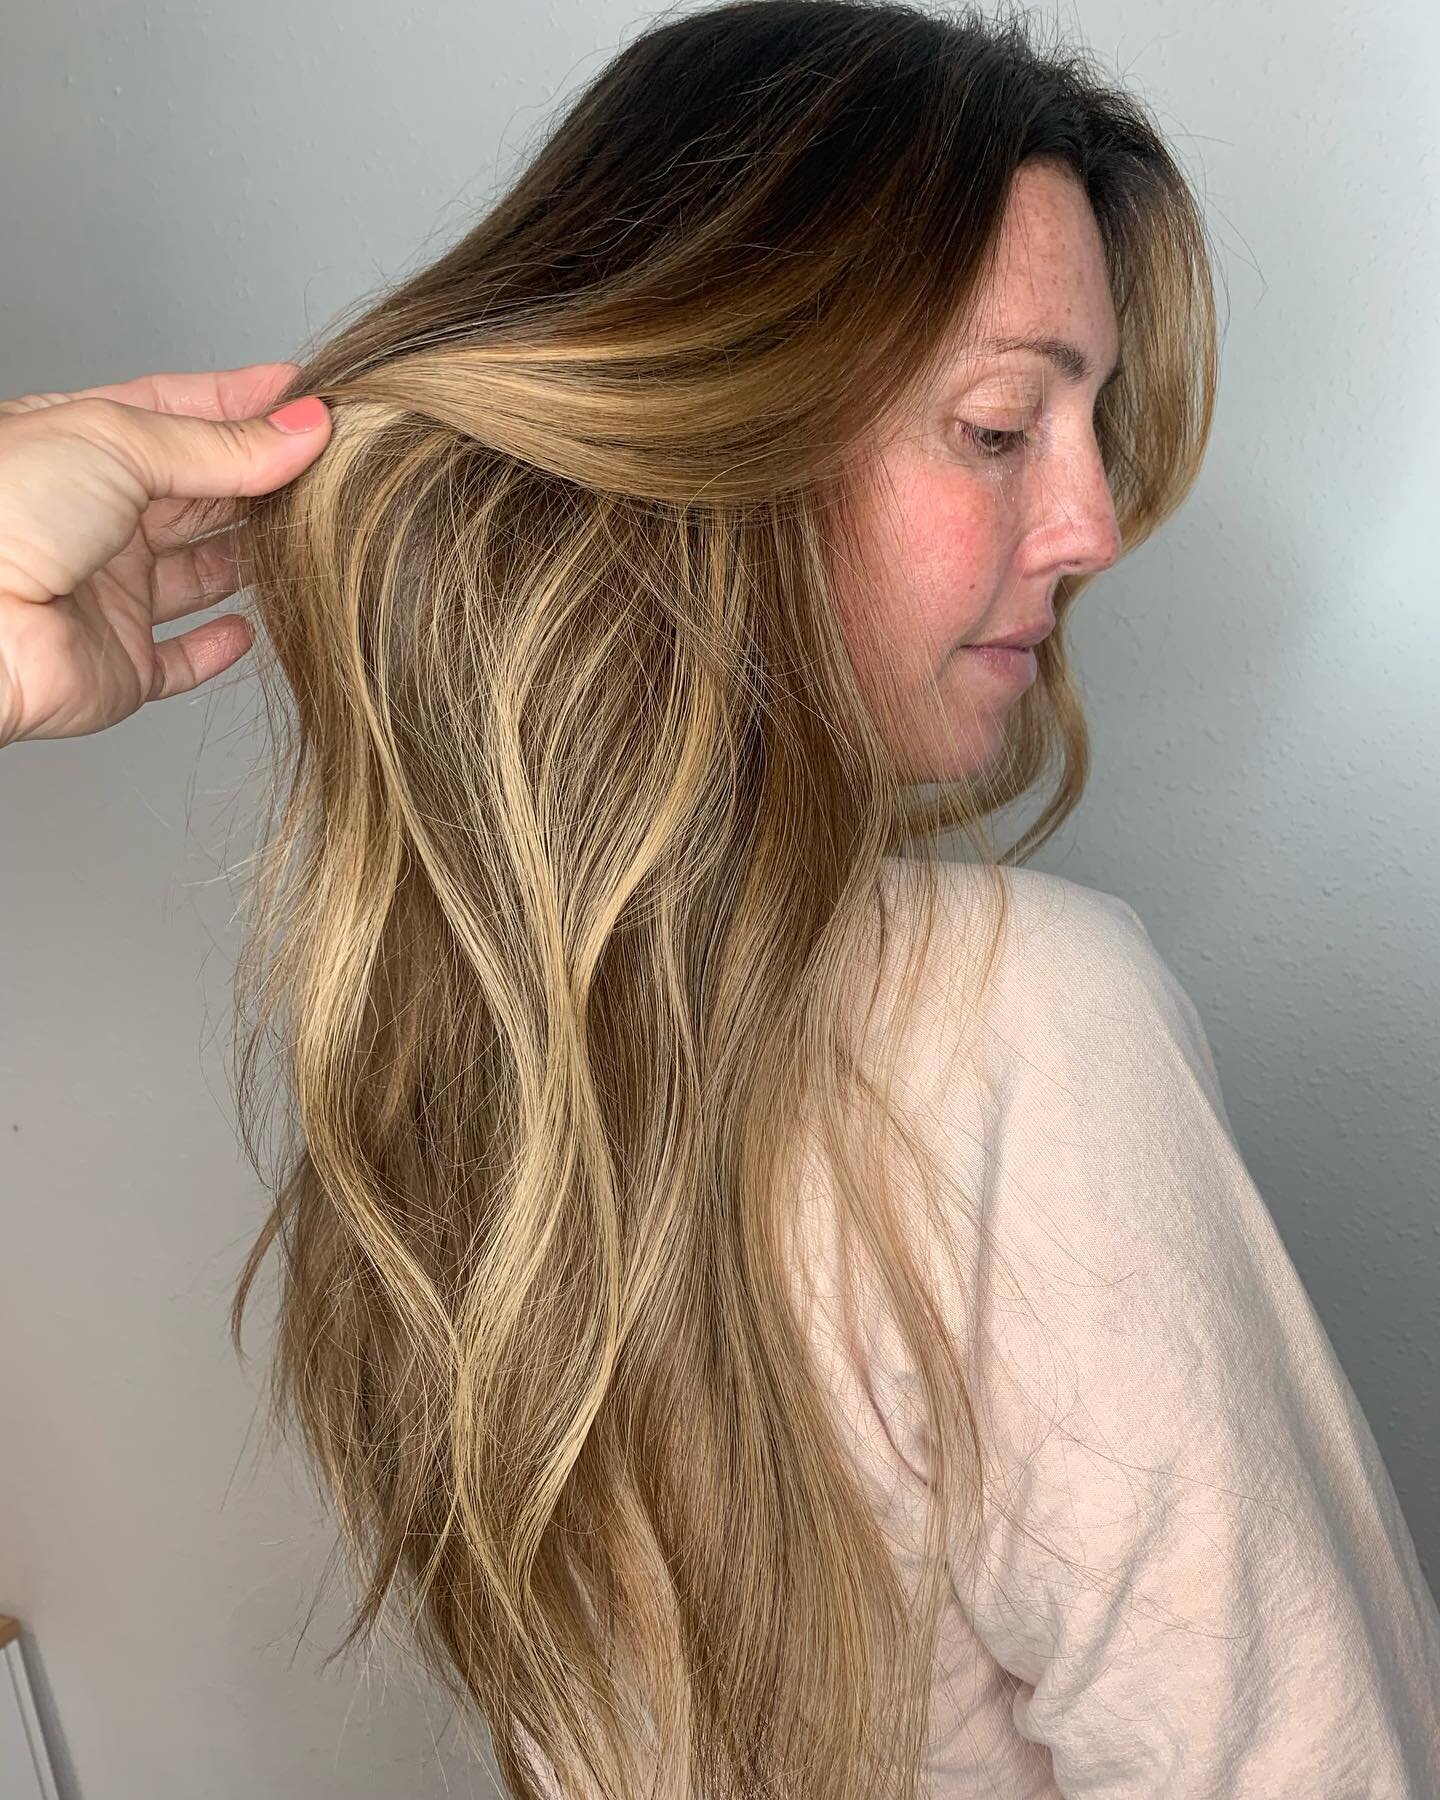 ✨Summer Ready ✨

This is my beautiful client&rsquo;s second set of luxury custom extensions. She wore her last set 4 1/2 months!

Flip right to see how healthy and long her natural hair is after her removal 💜 

Custom luxury extensions are strand by